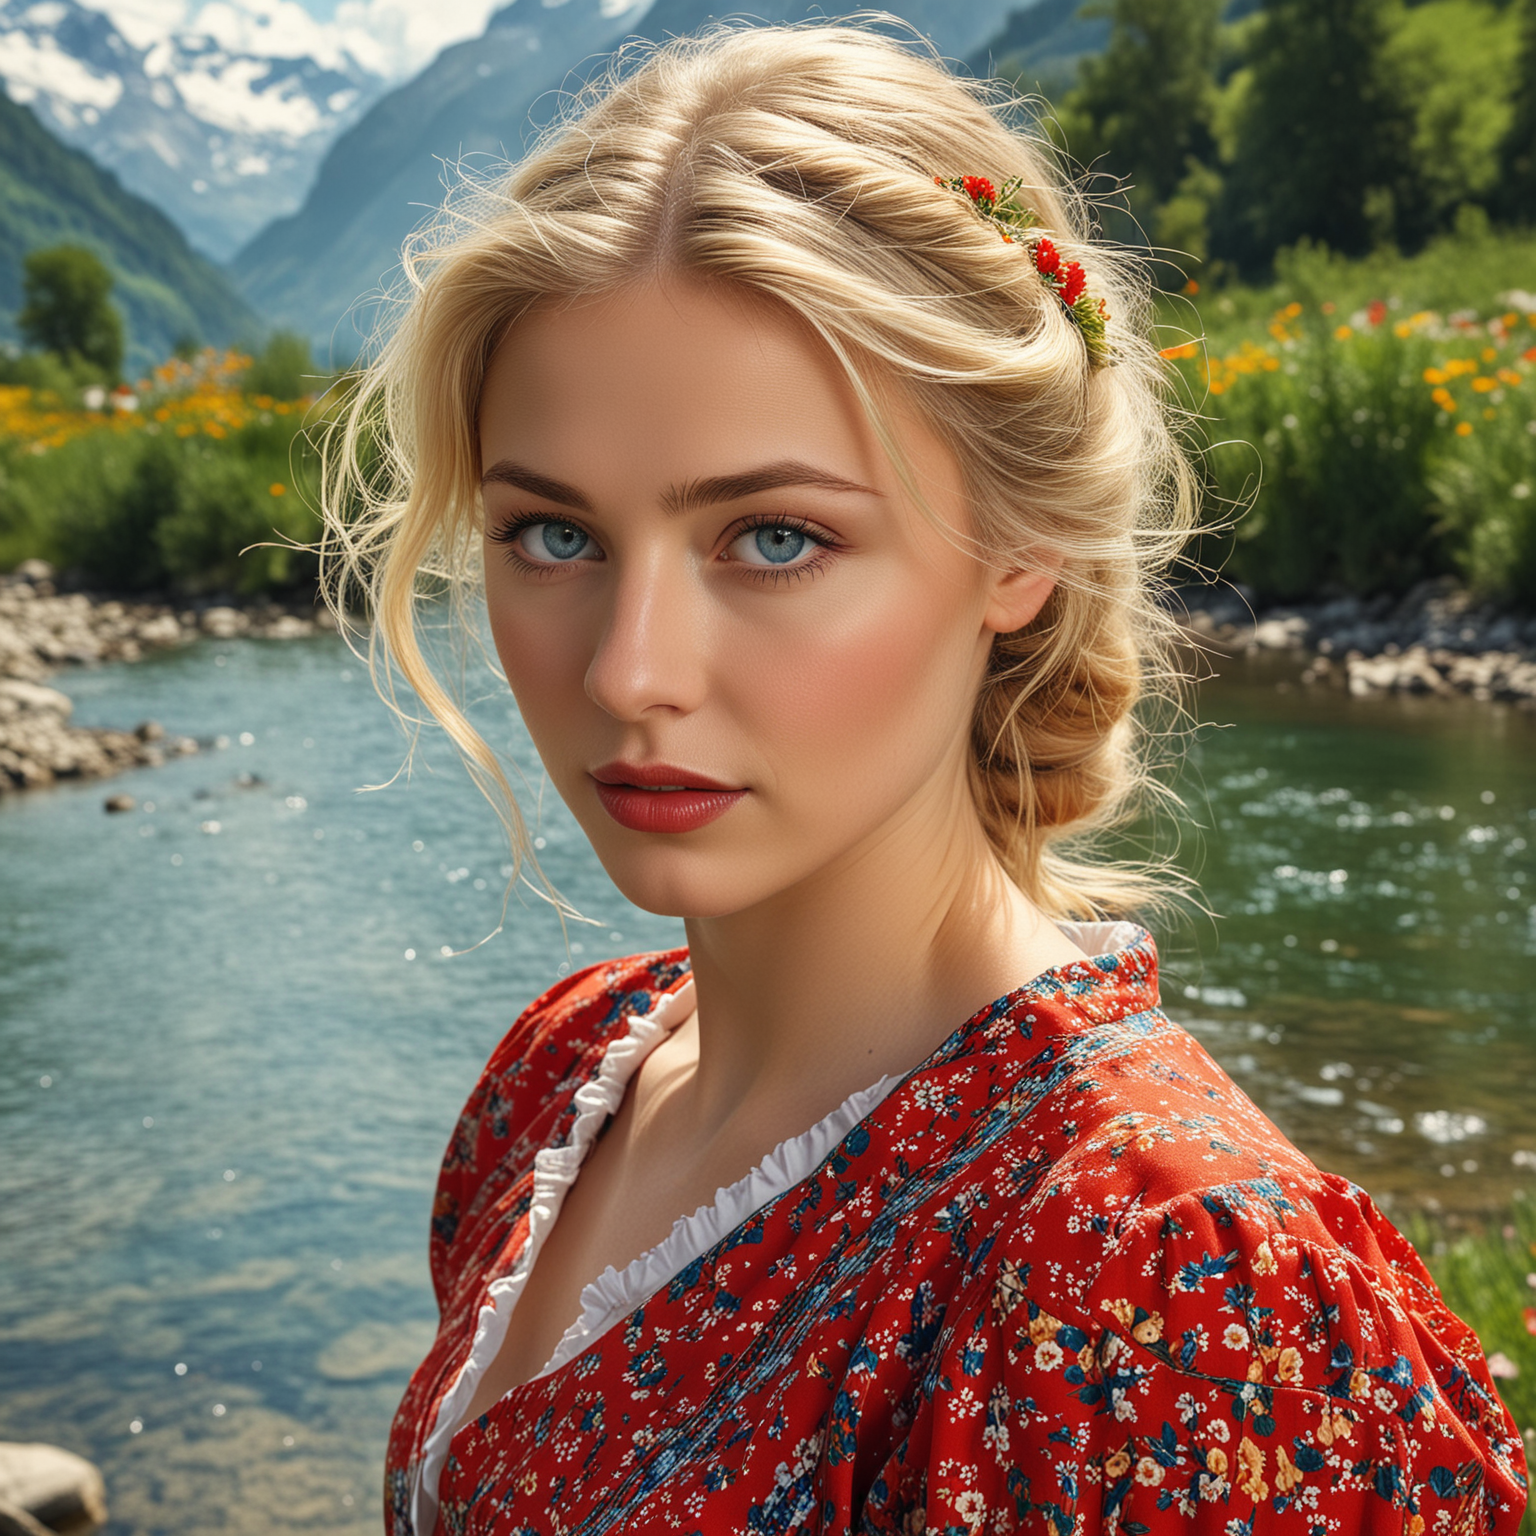 Swiss Woman in Traditional Clothing by the Alpine River